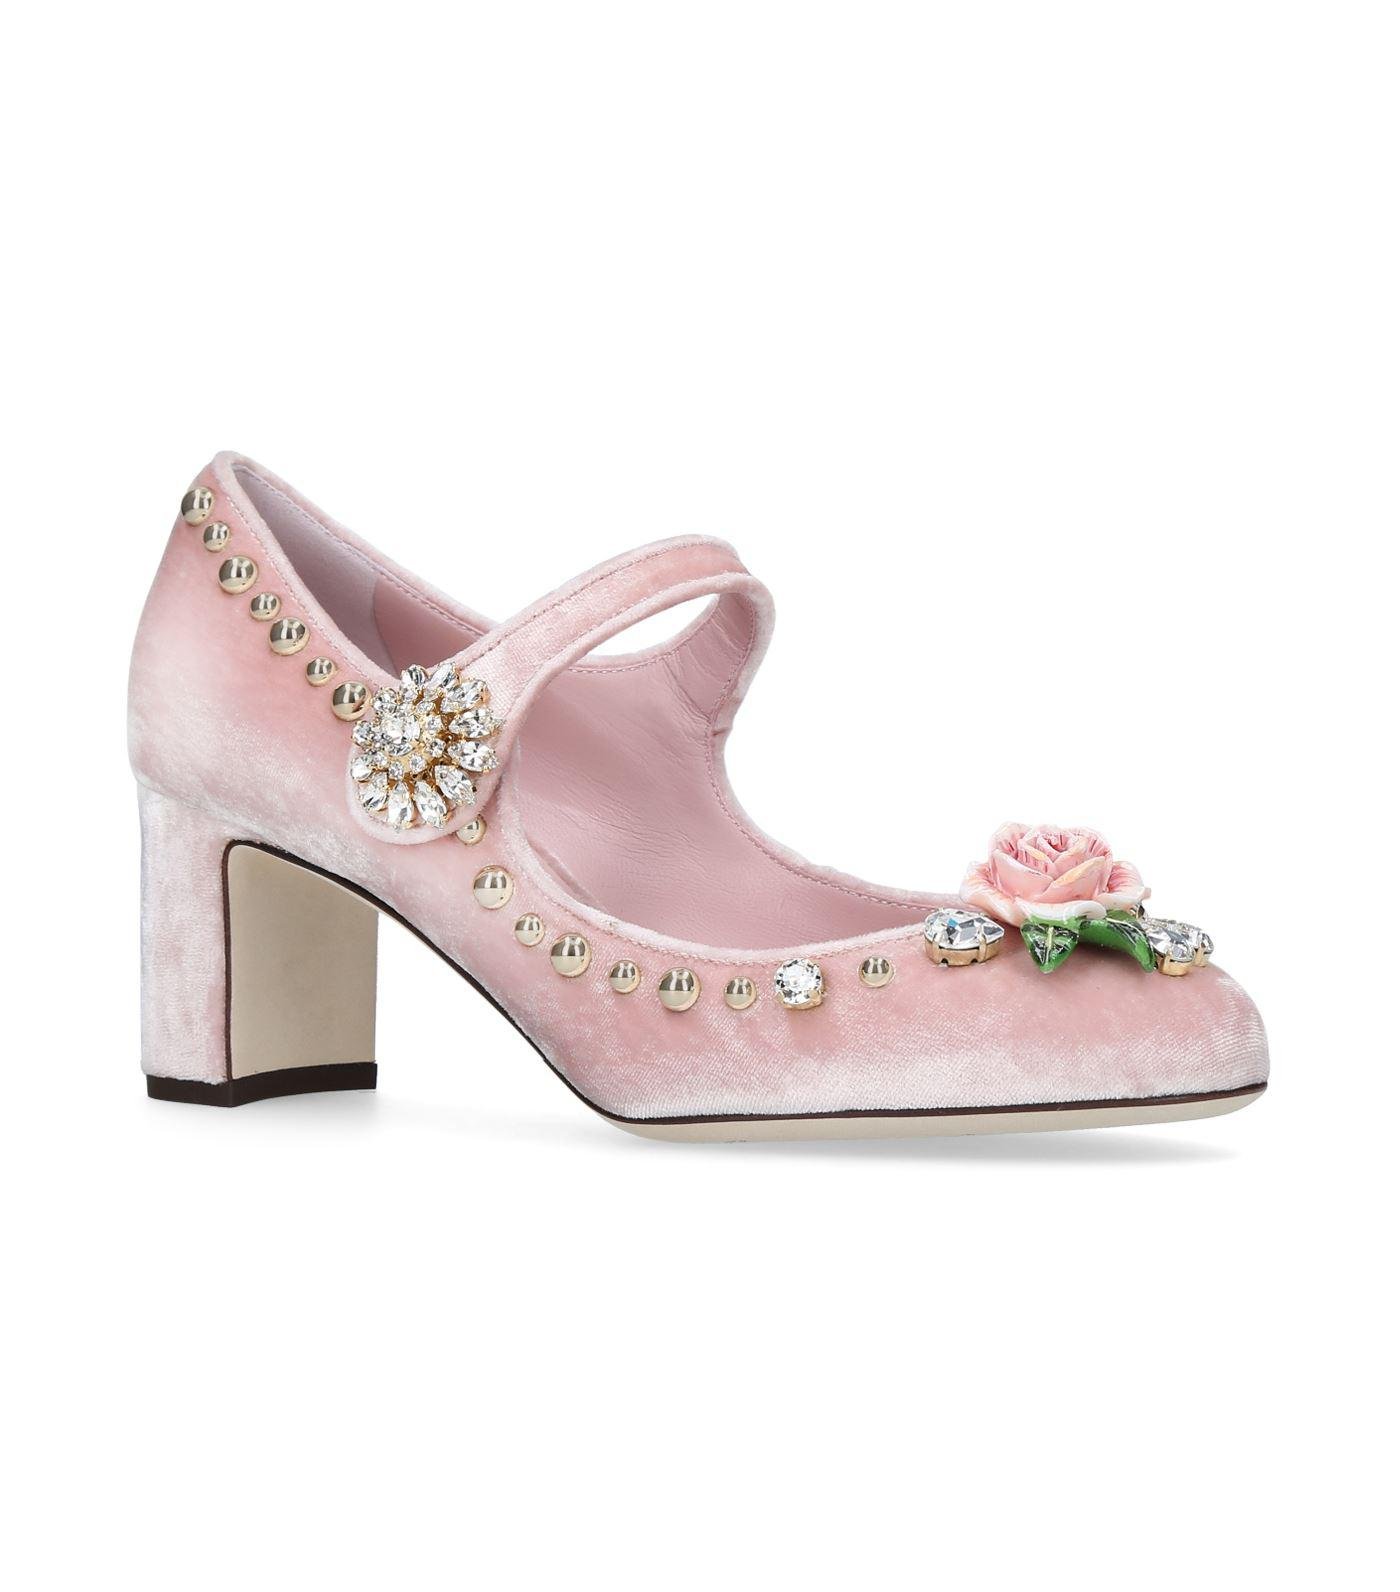 dolce and gabbana pink heels